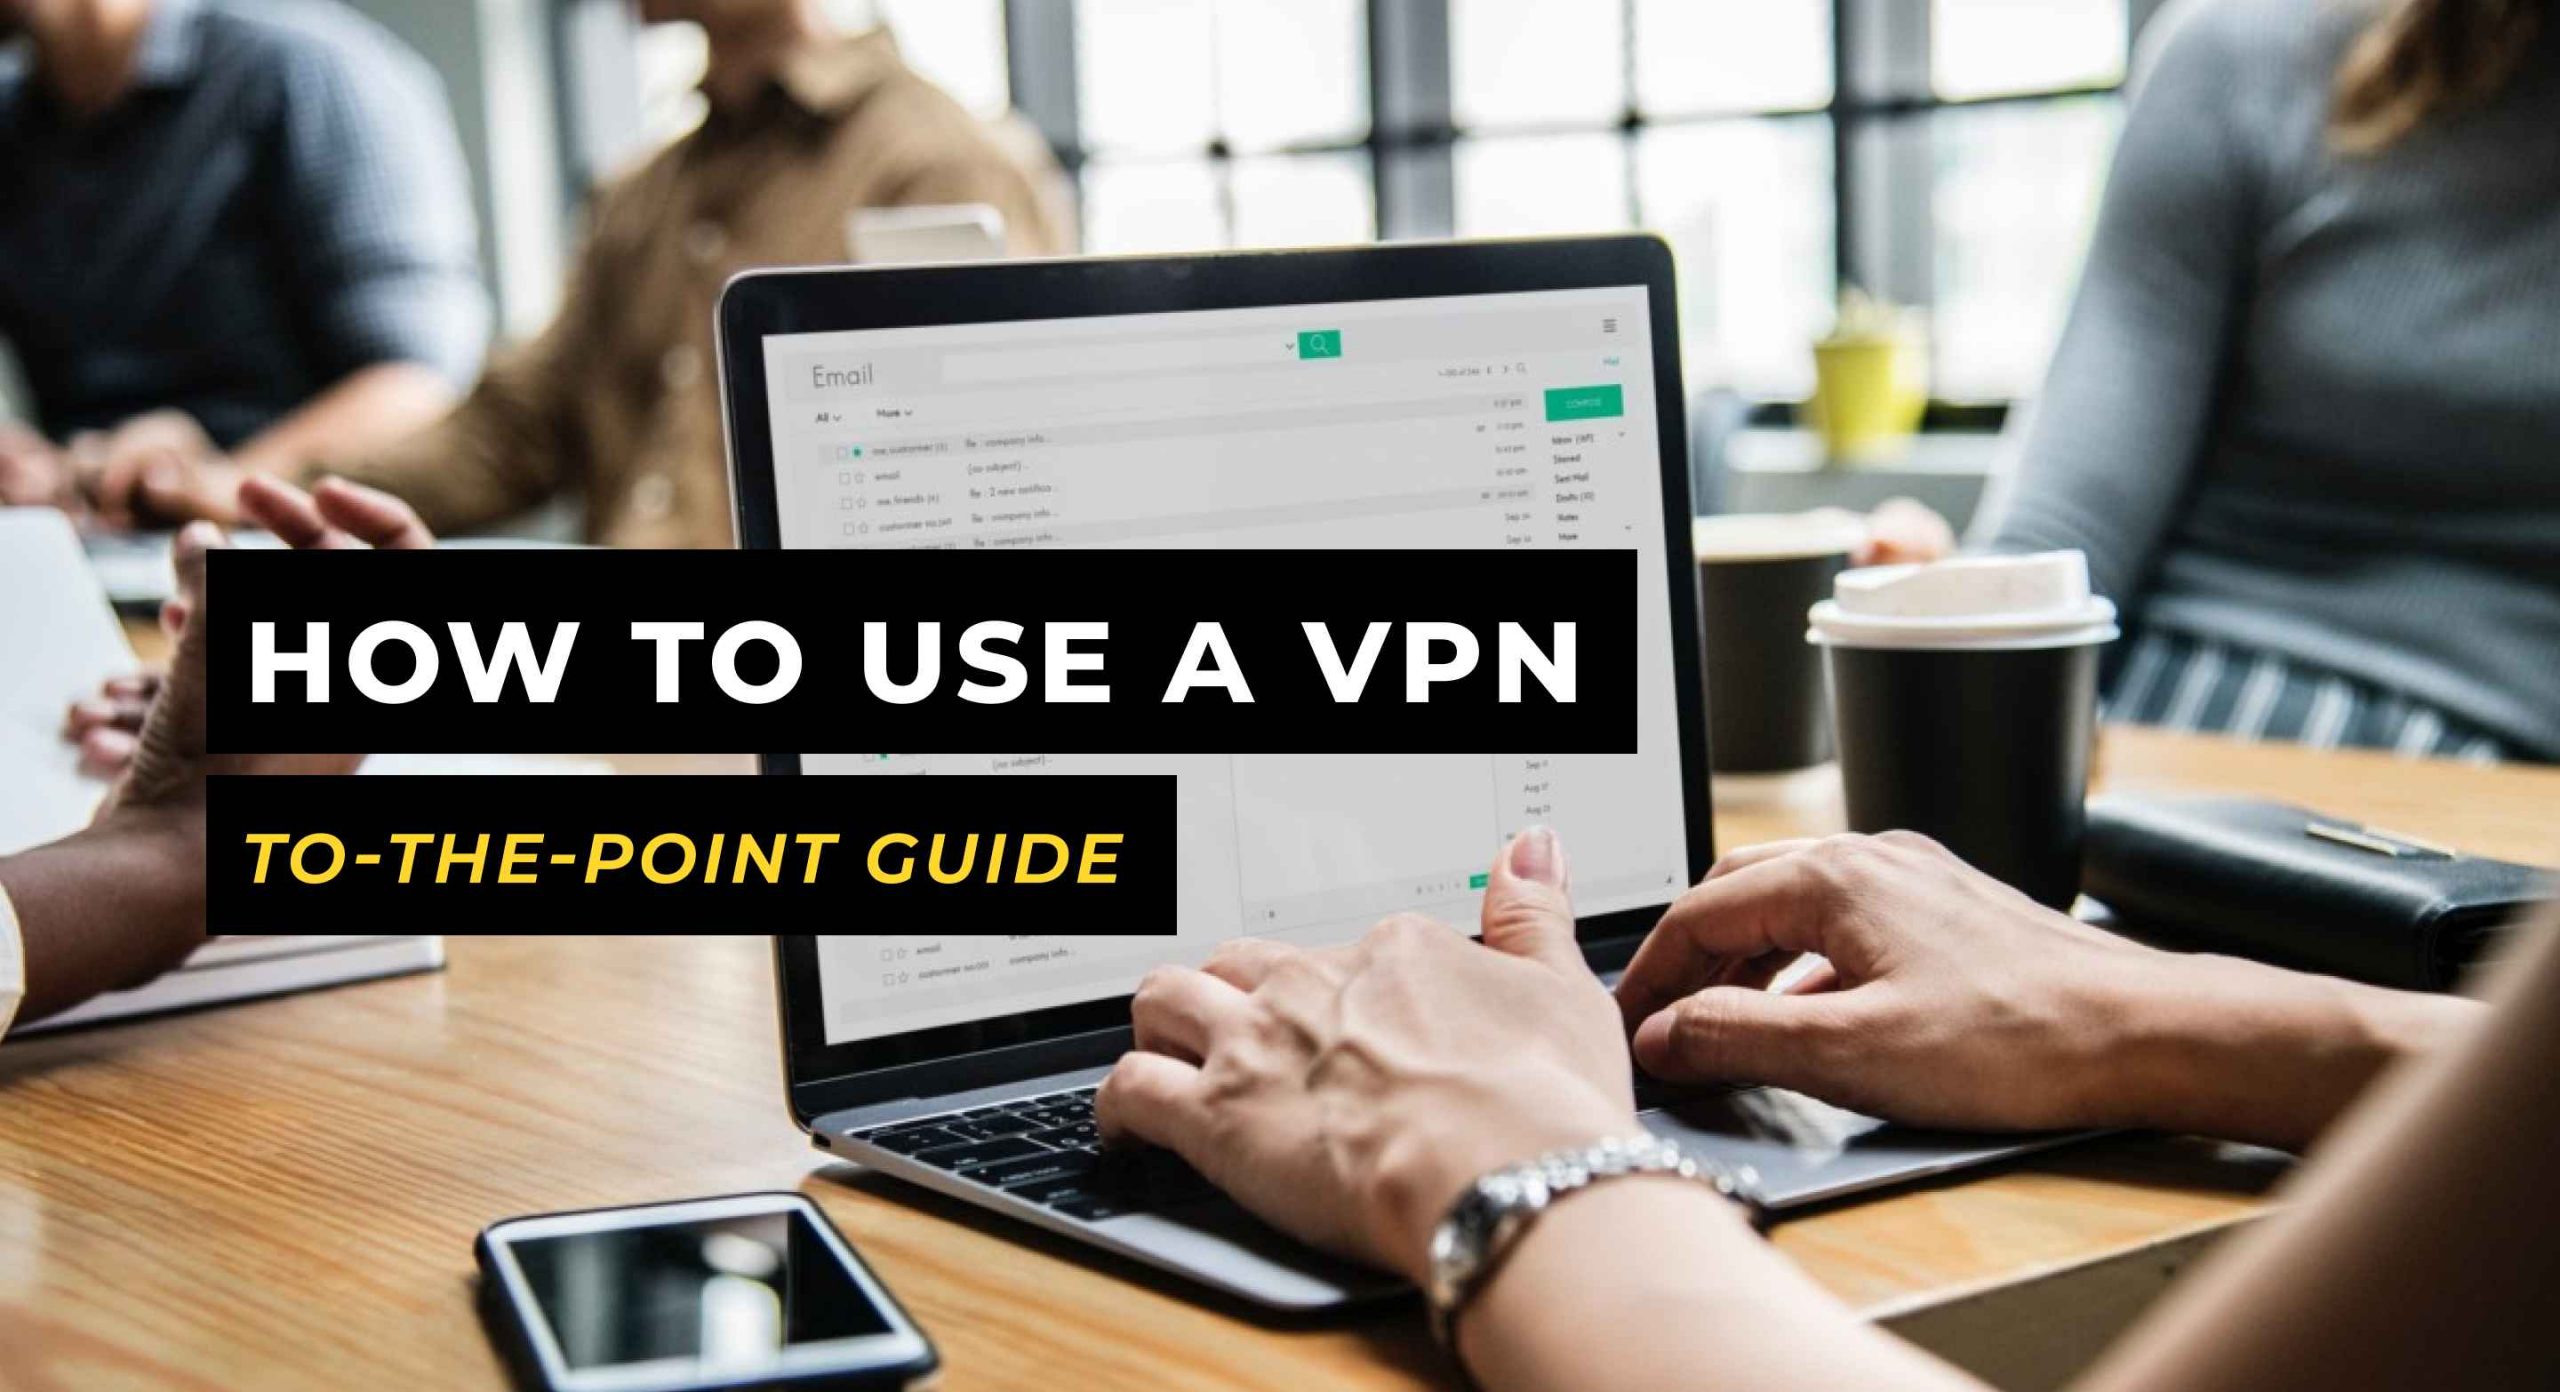 How to Use a VPN on PC [Tutorial]